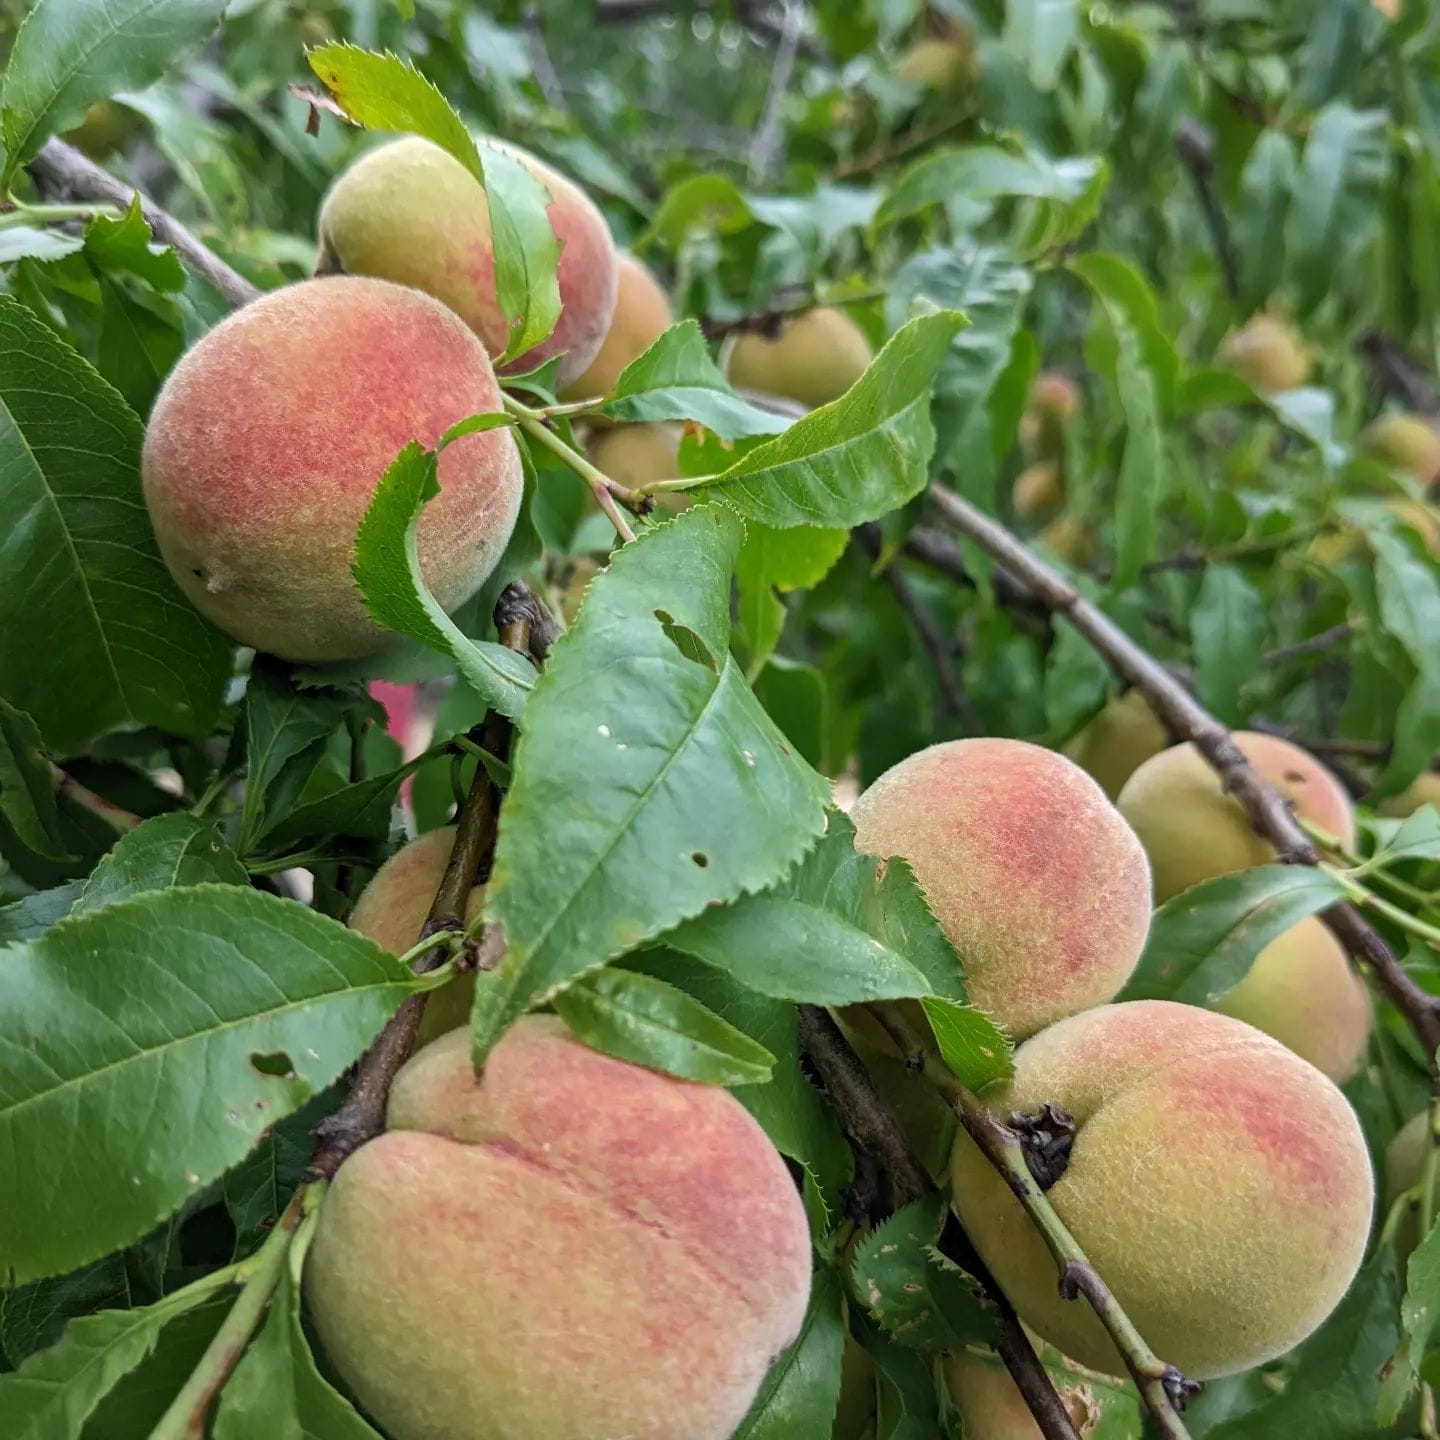 Peaches ripening on the branch.